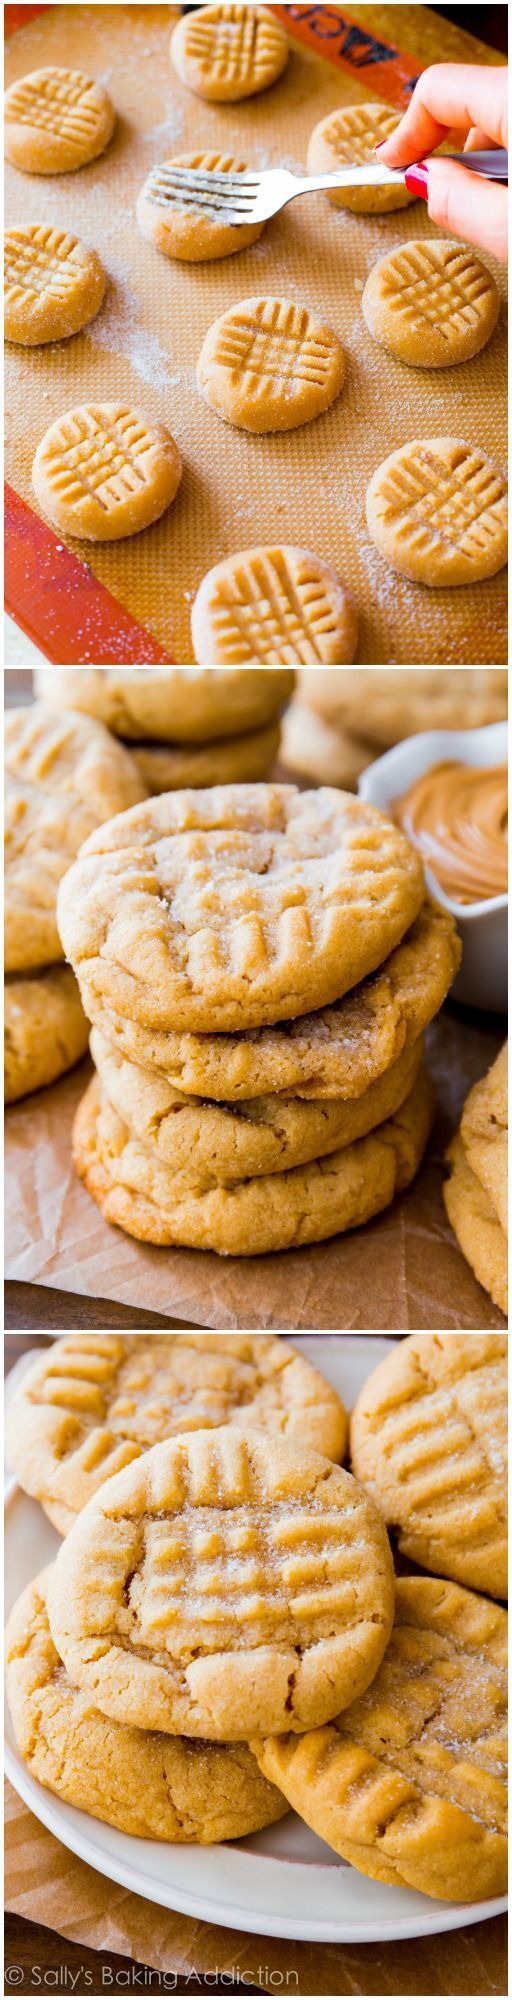 Classic Peanut Butter Cookies – Super chewy and they stay soft for DAYS! If they last that long.